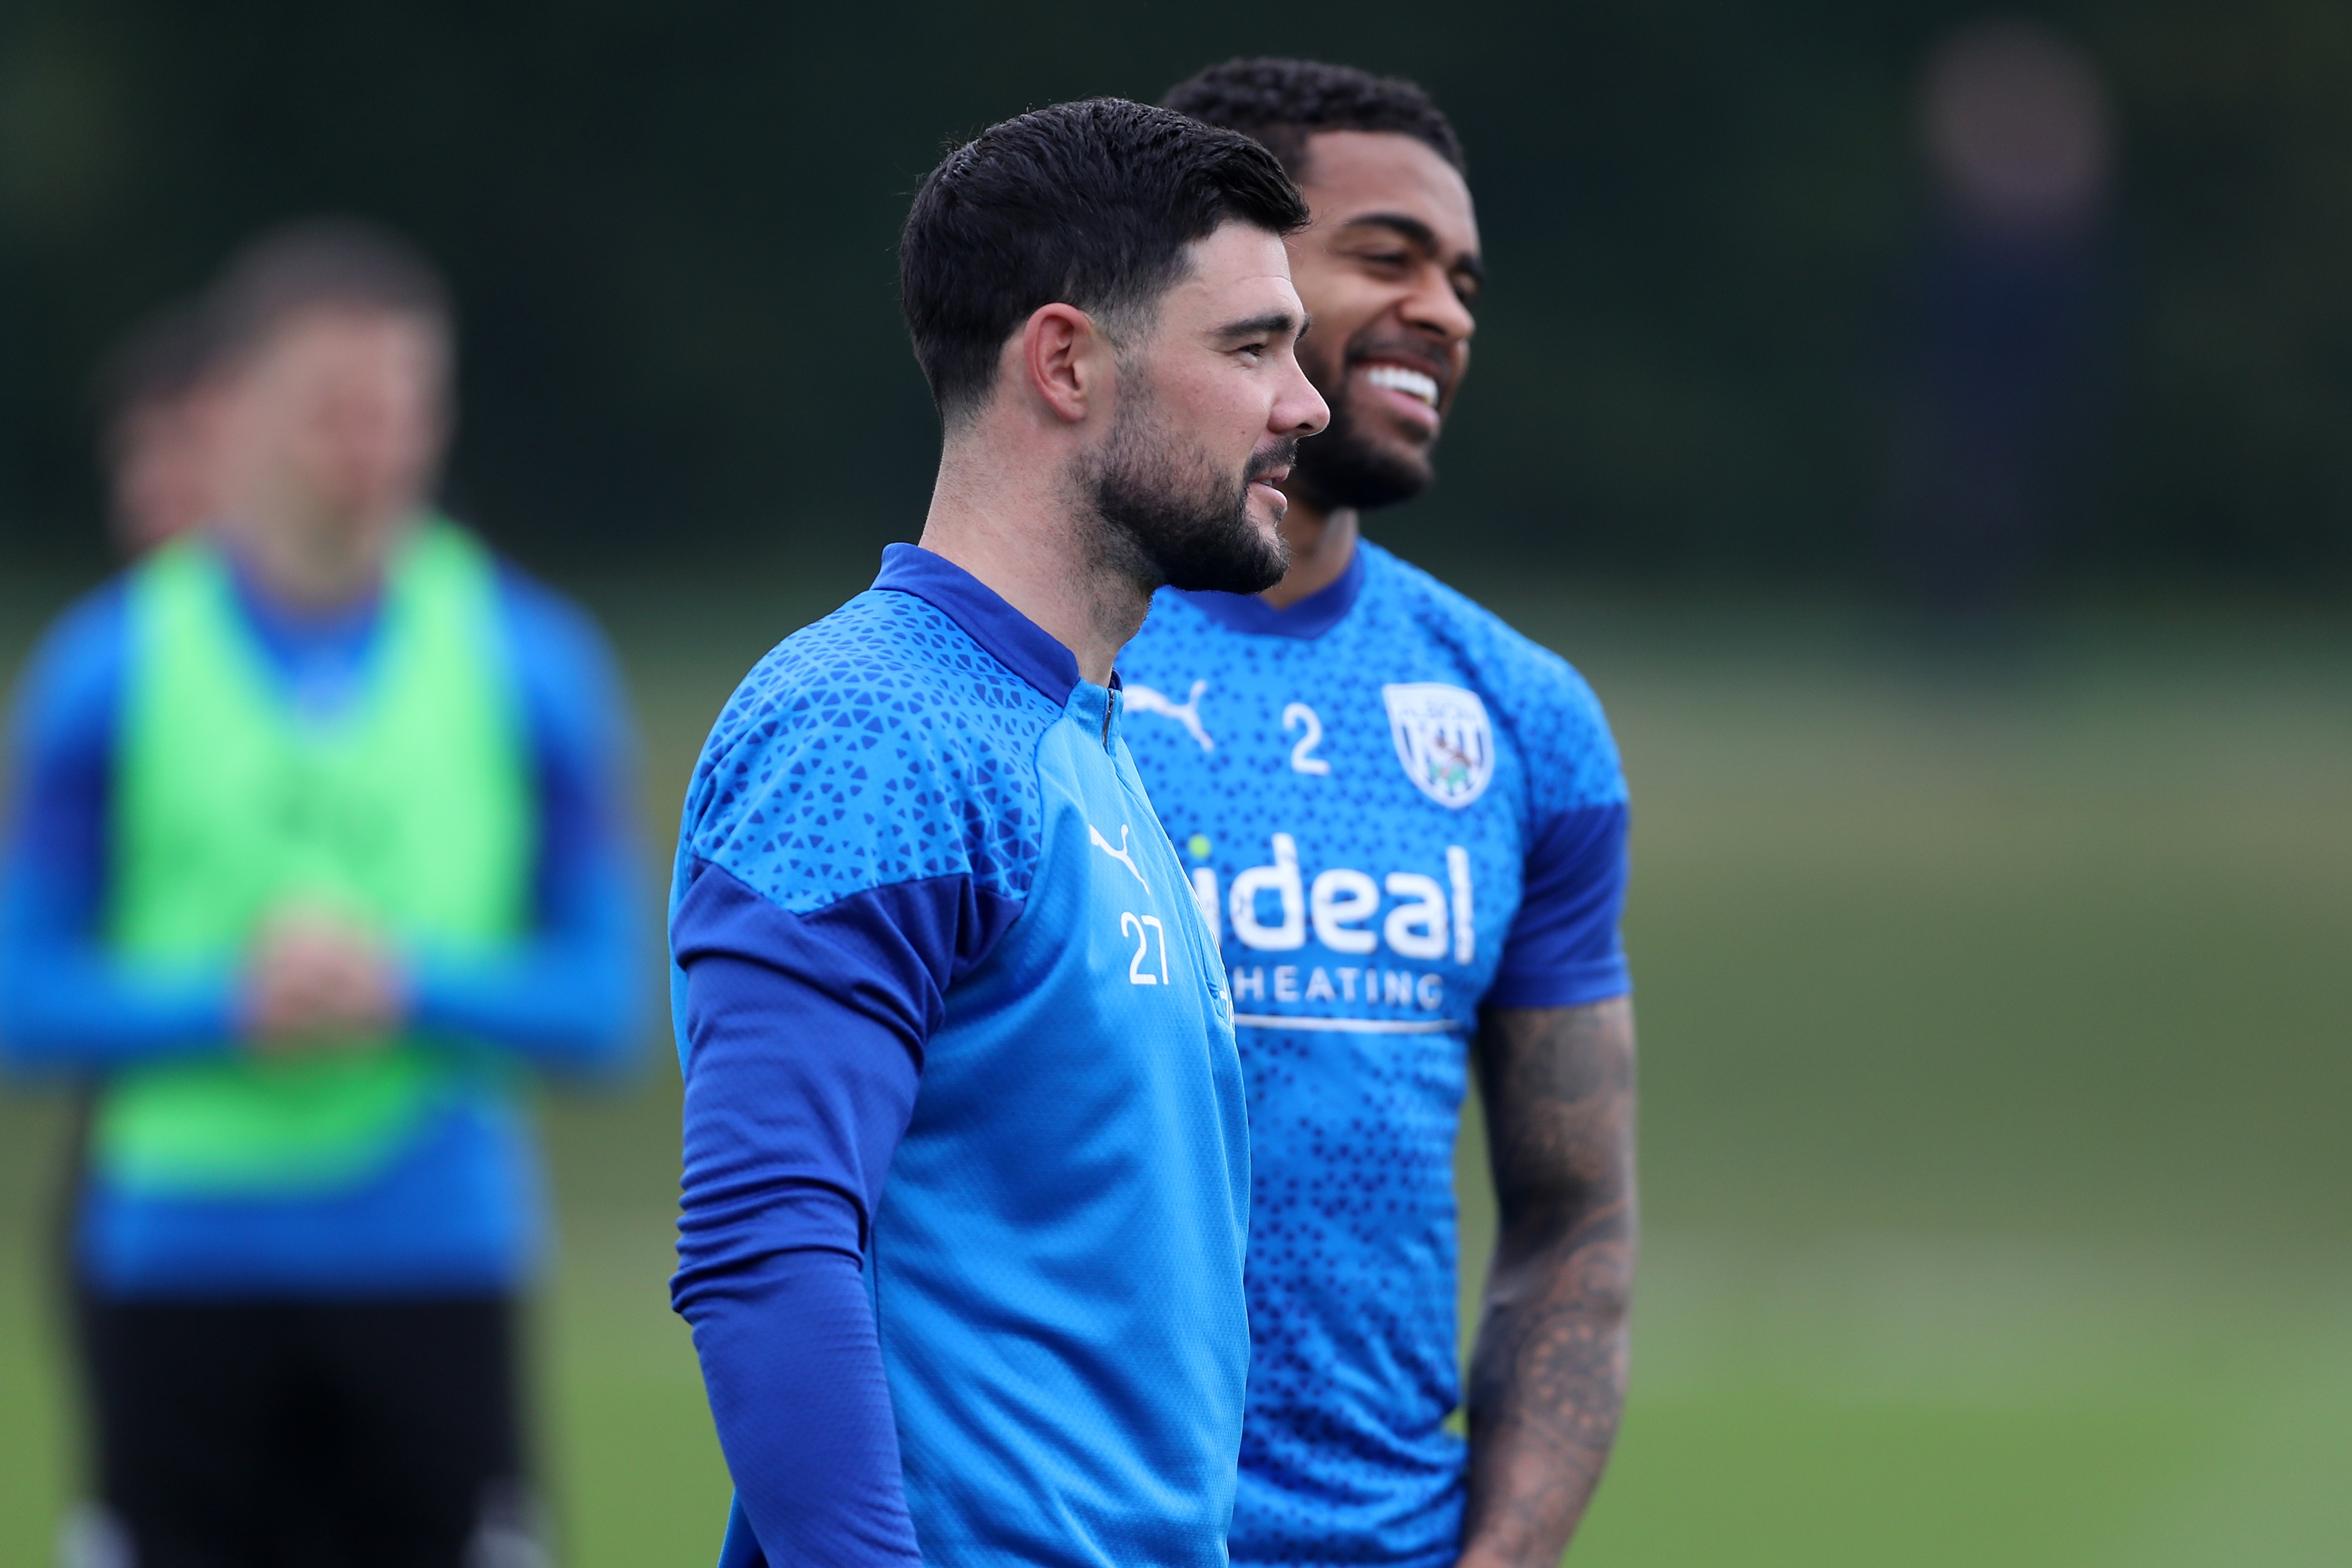 Alex Mowatt and Darnell Furlong smiling during a training session